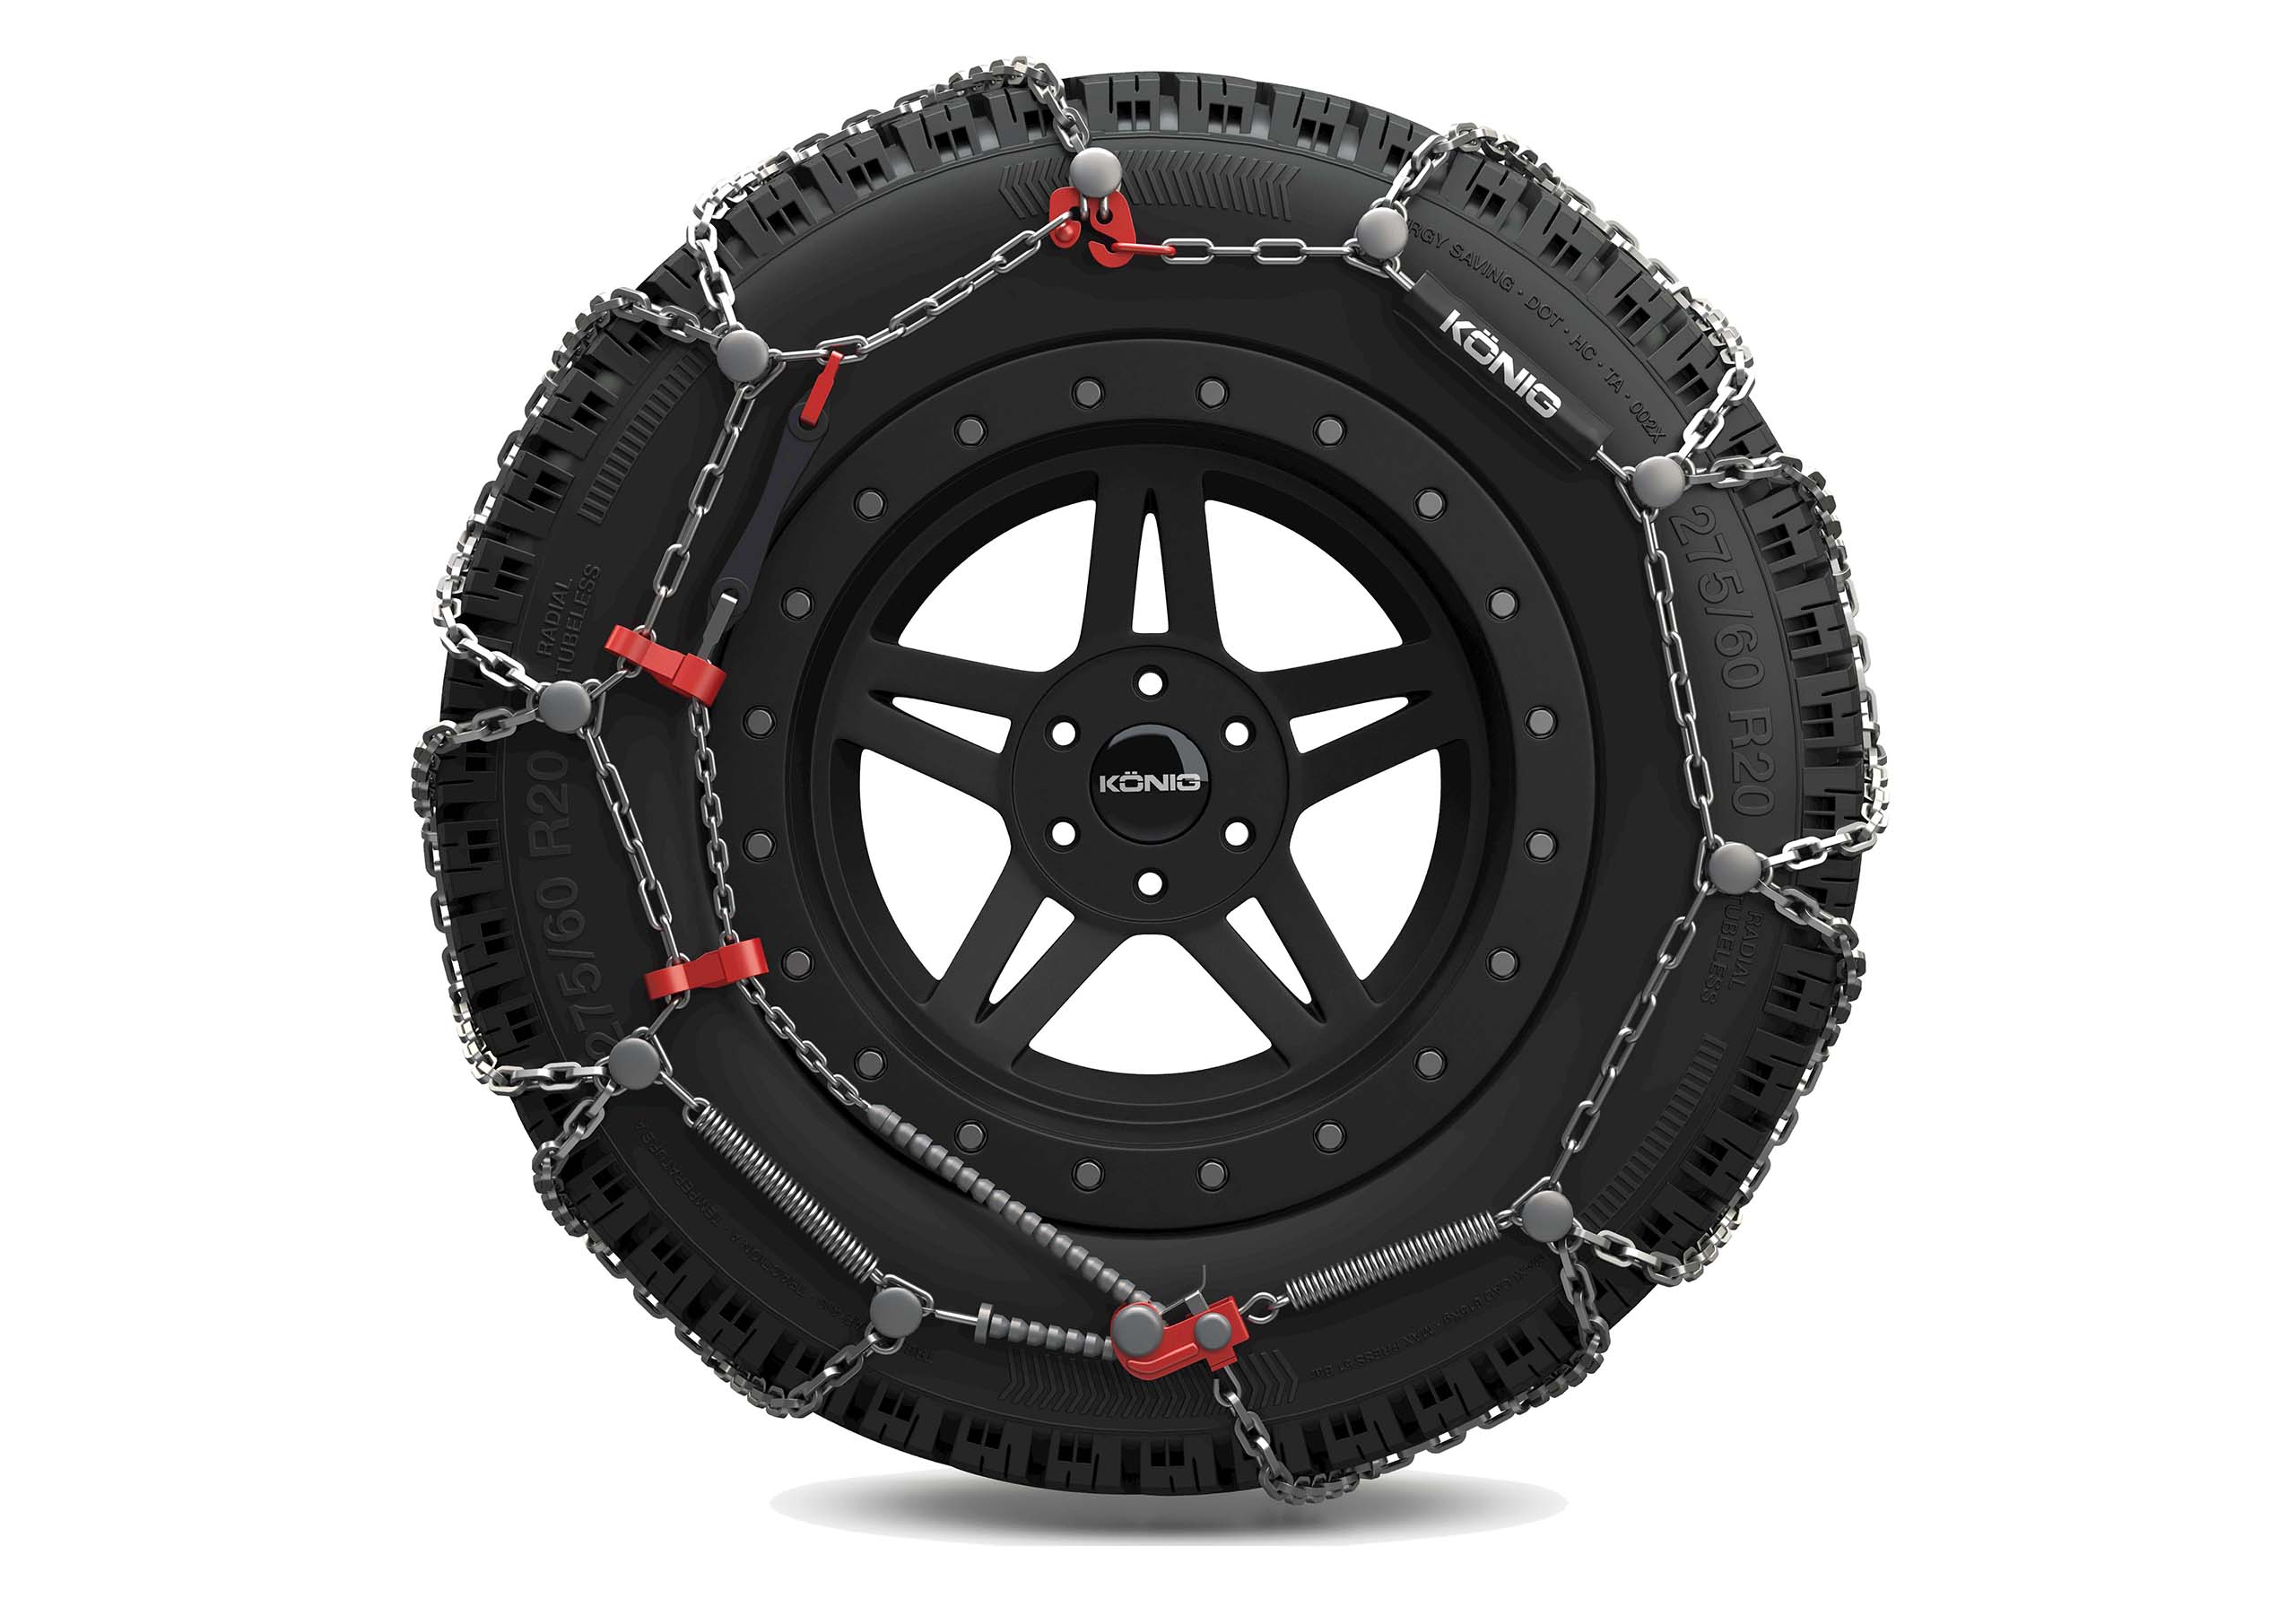 Hummer H3 (2005 to 2010):Knig XD-16 Pro snow chains (pair) no. XD-16 Pro 279